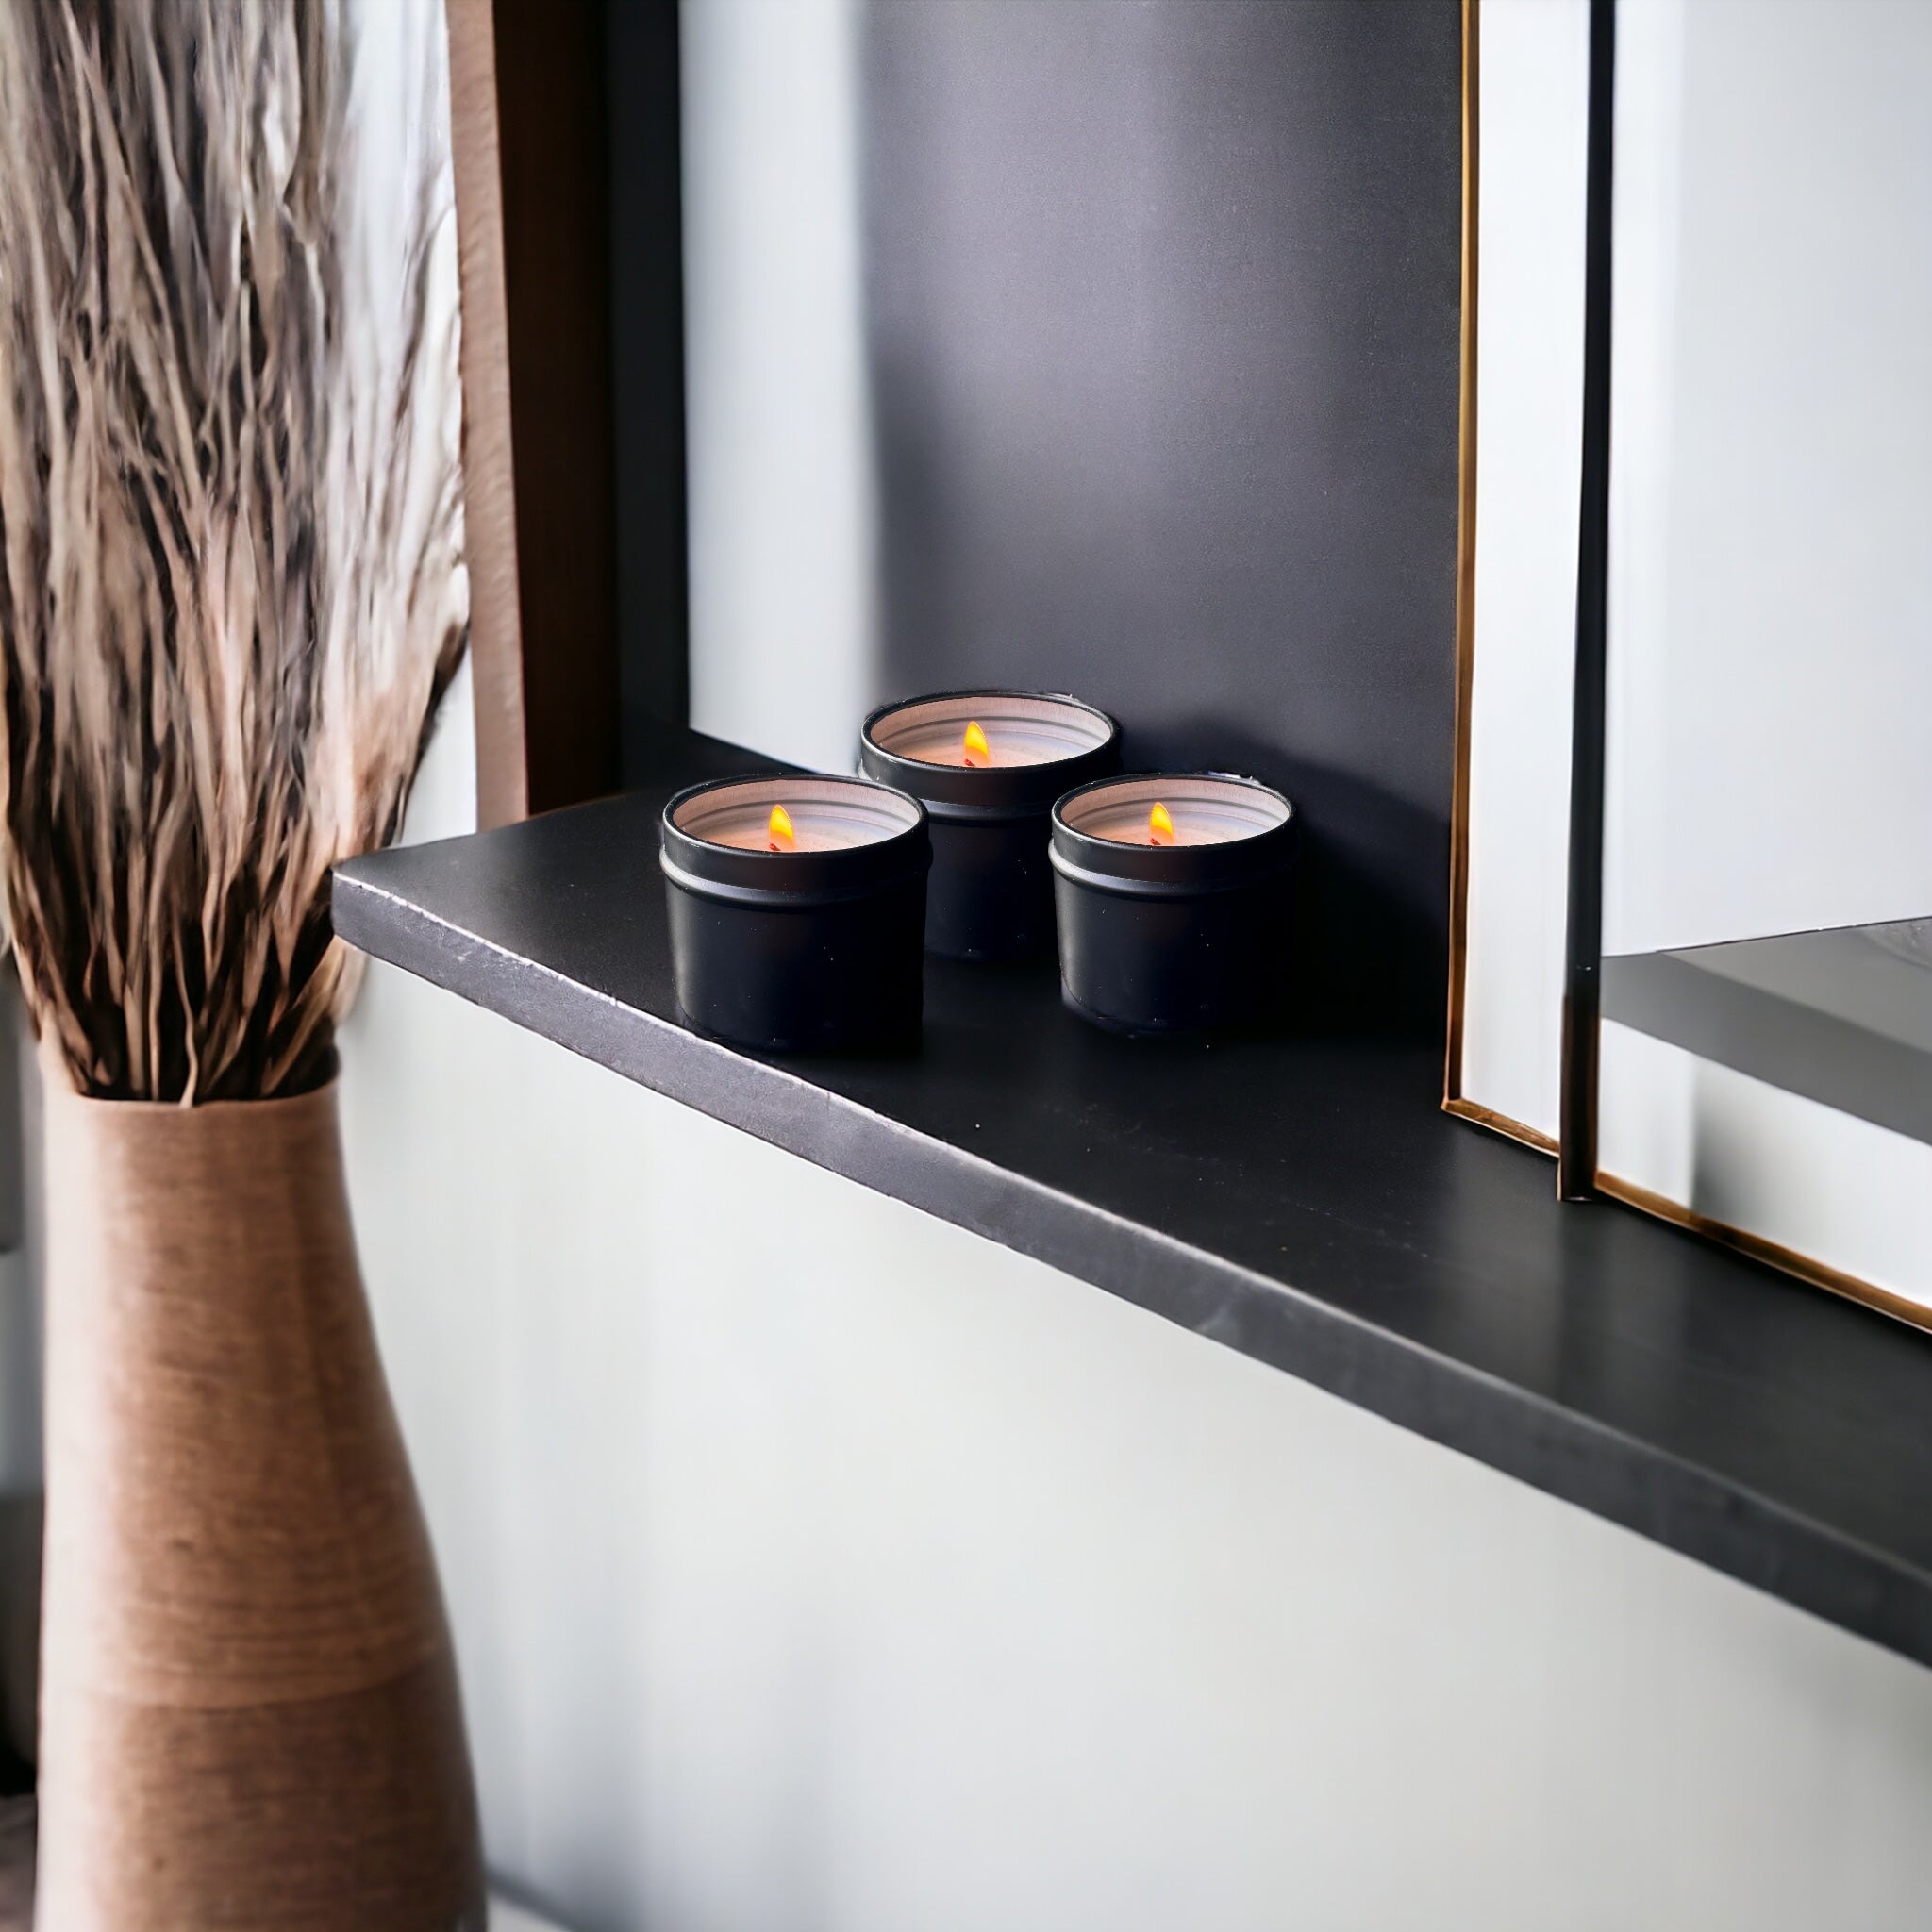 Three lit A TINY TIN CANDLES - MADNESS CANDLES, including a tropical paradise candle, on a modern shelf, creating a tranquil and cozy ambiance next to a decorative mirror and vase with dried twigs.